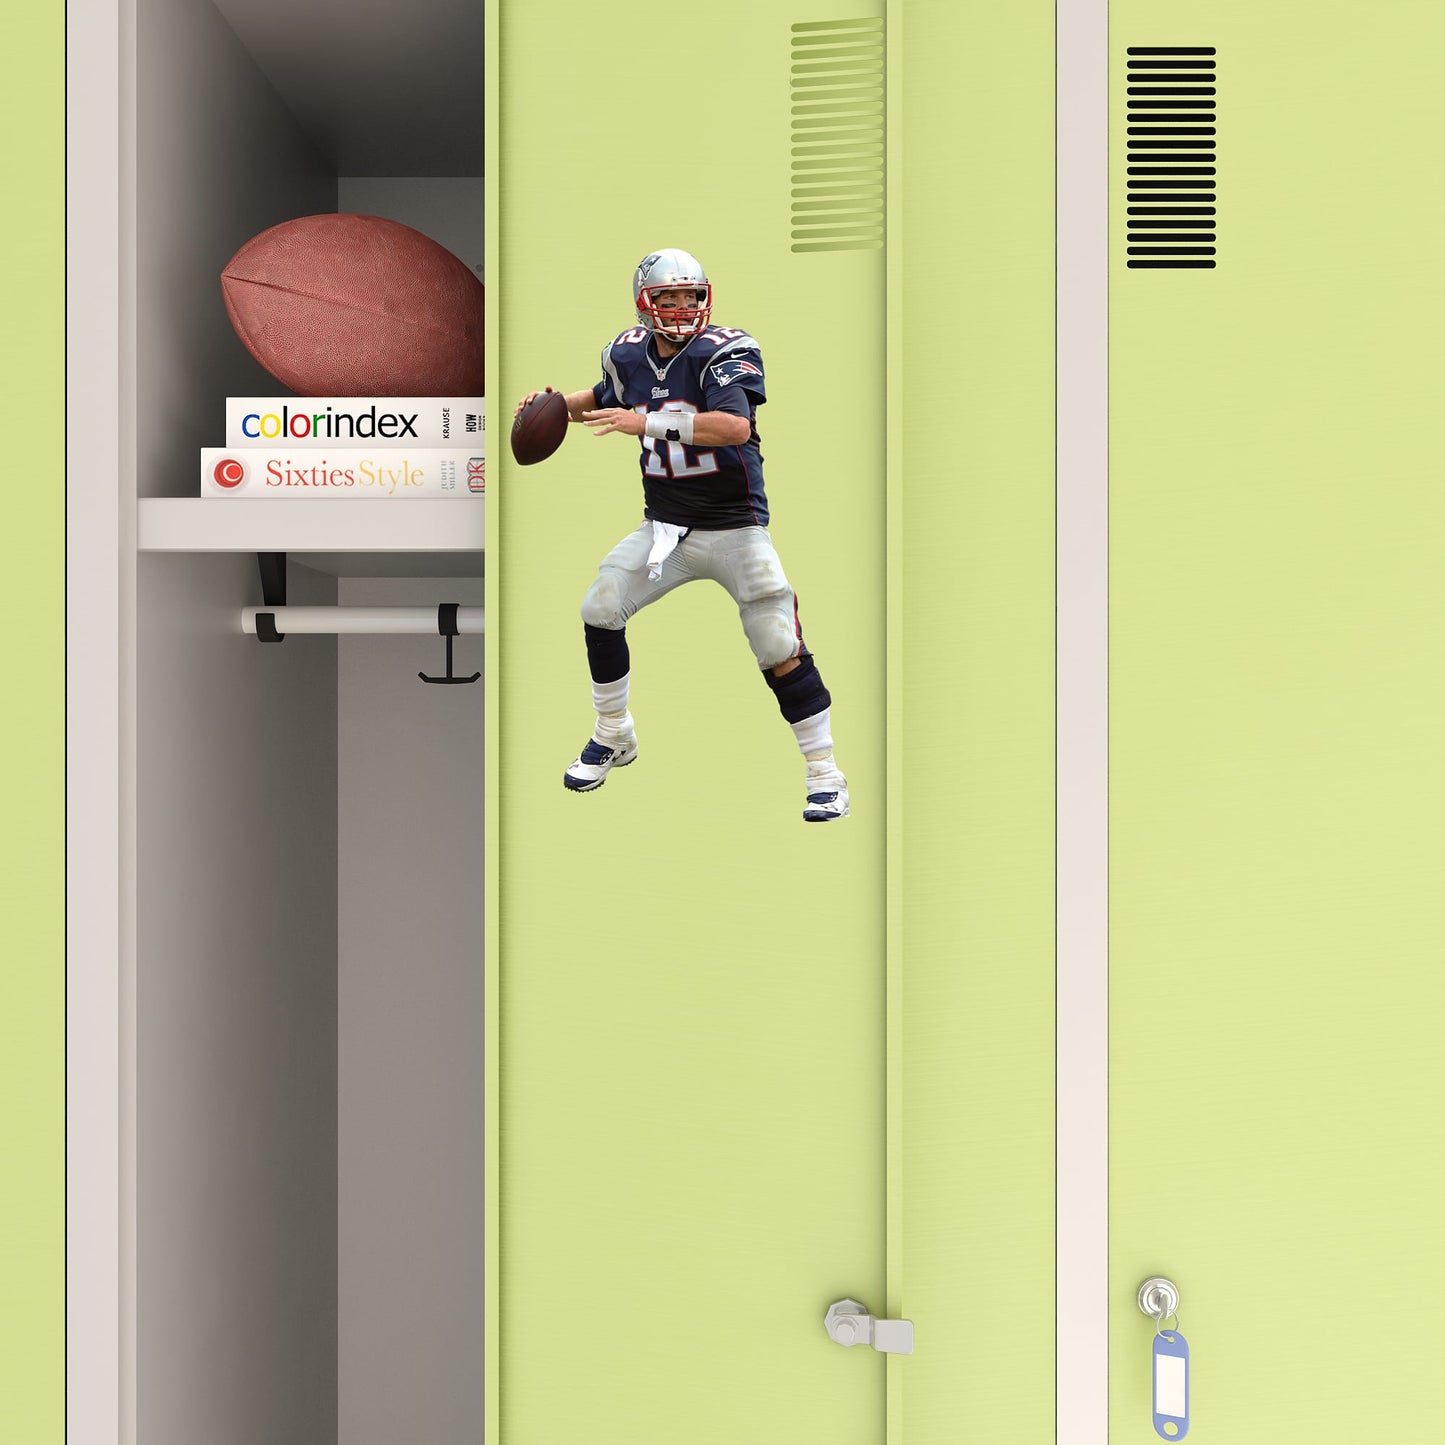 Bring the action of the NFL into your home with a wall decal of Tom Brady! High quality, durable, and tear resistant, you'll be able to stick and move it as many times as you want to create the ultimate football experience in any room!